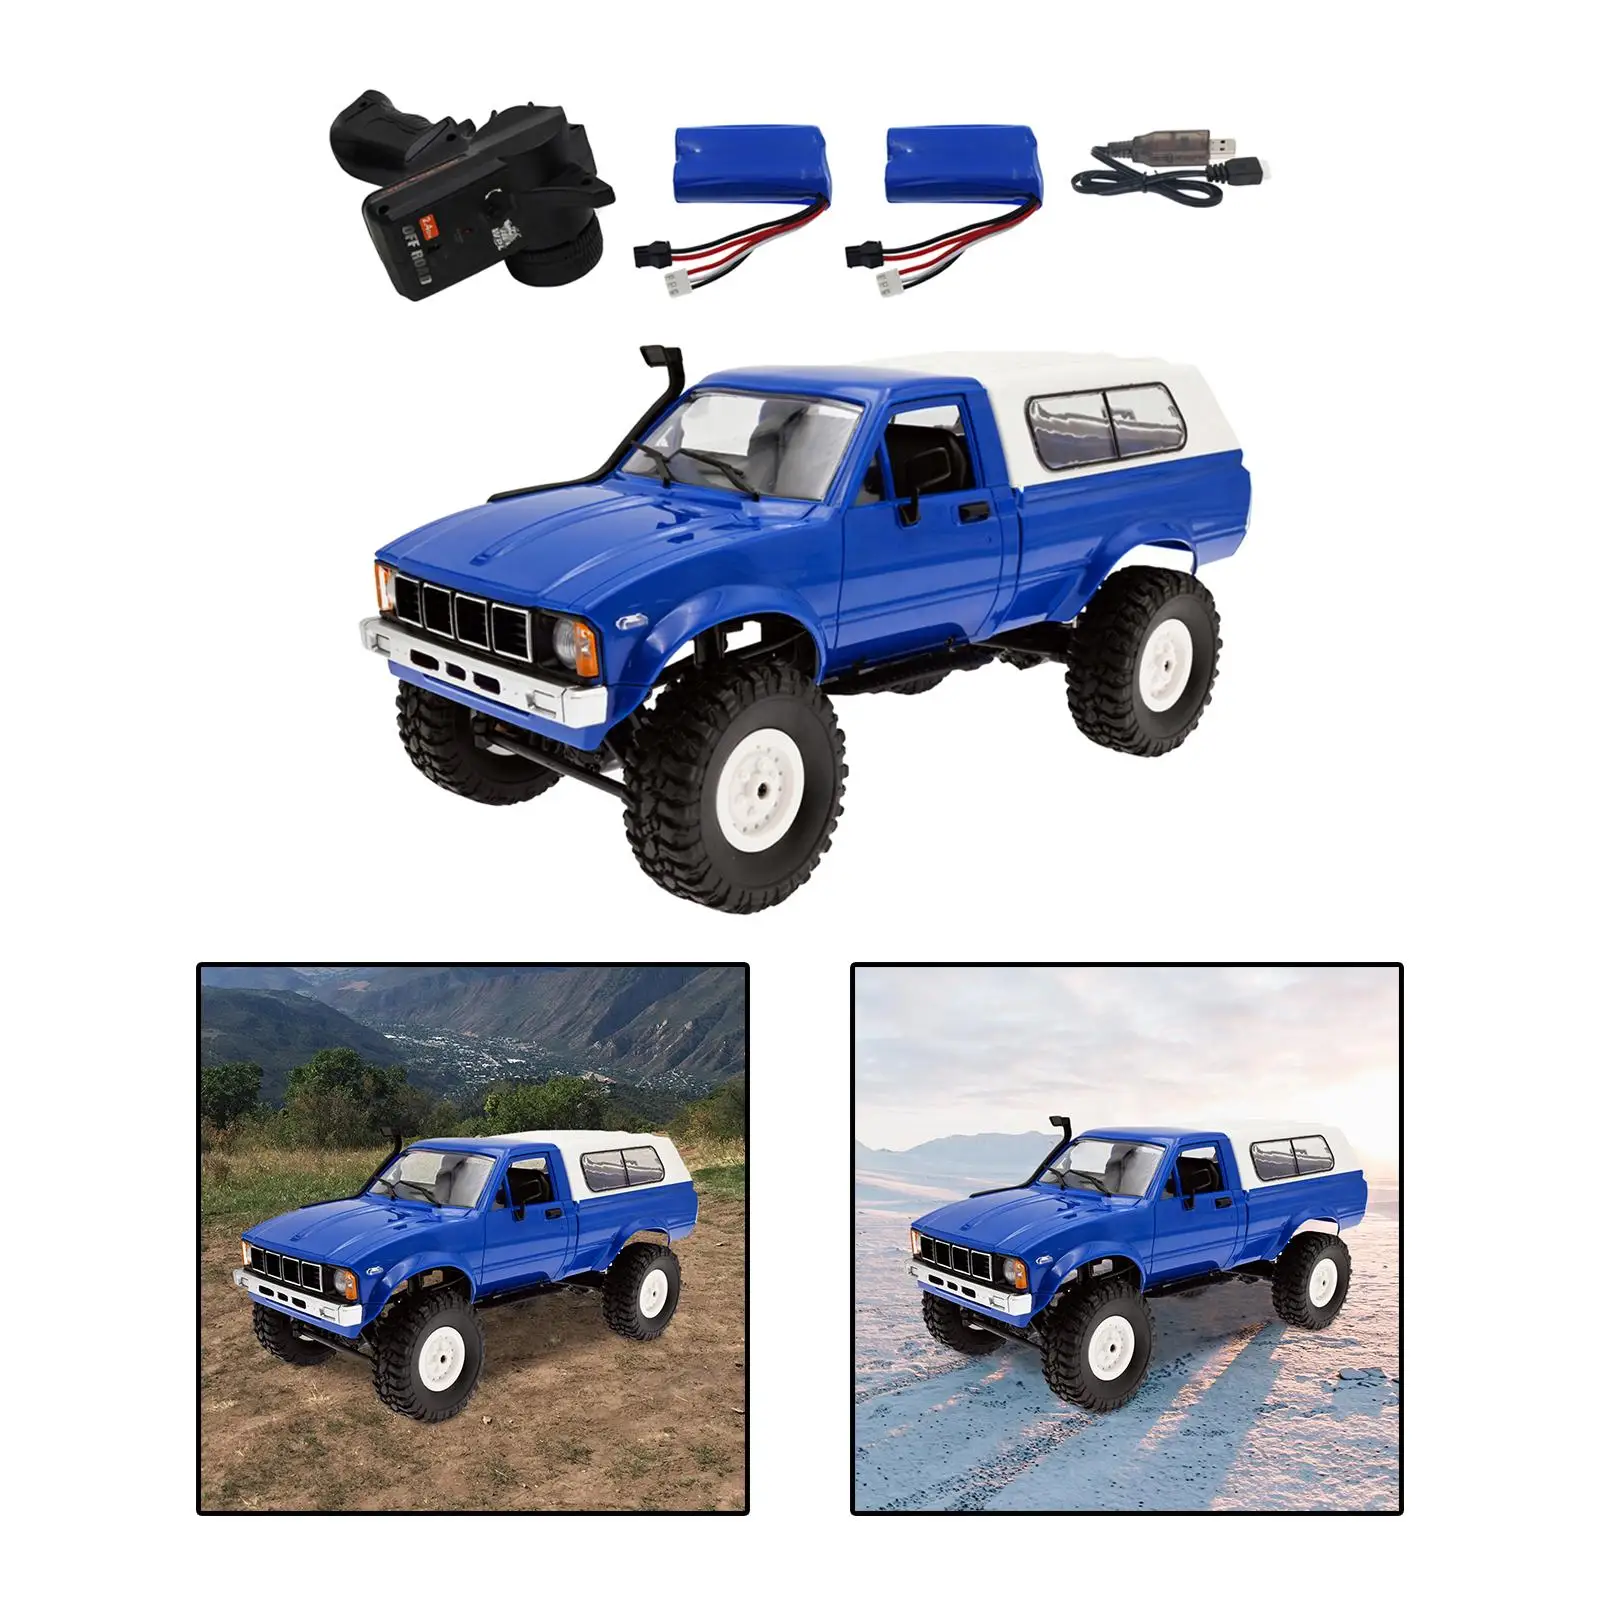 1:16 Scale RC Car15km/H 2.4G Forward for Adults Kids Holiday Gifts